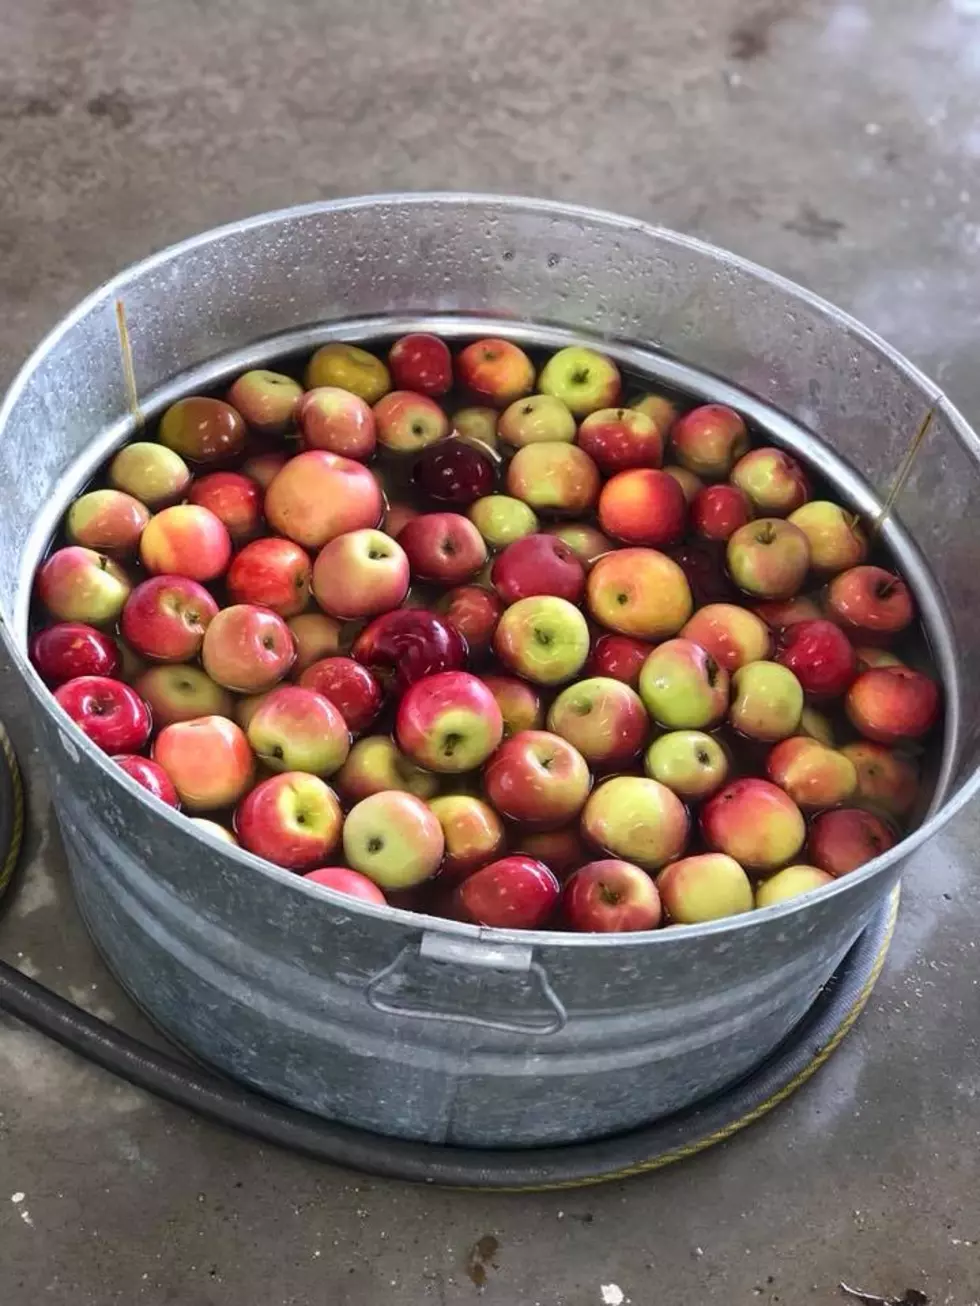 Things I Learned Making Apple Cider For The First Time